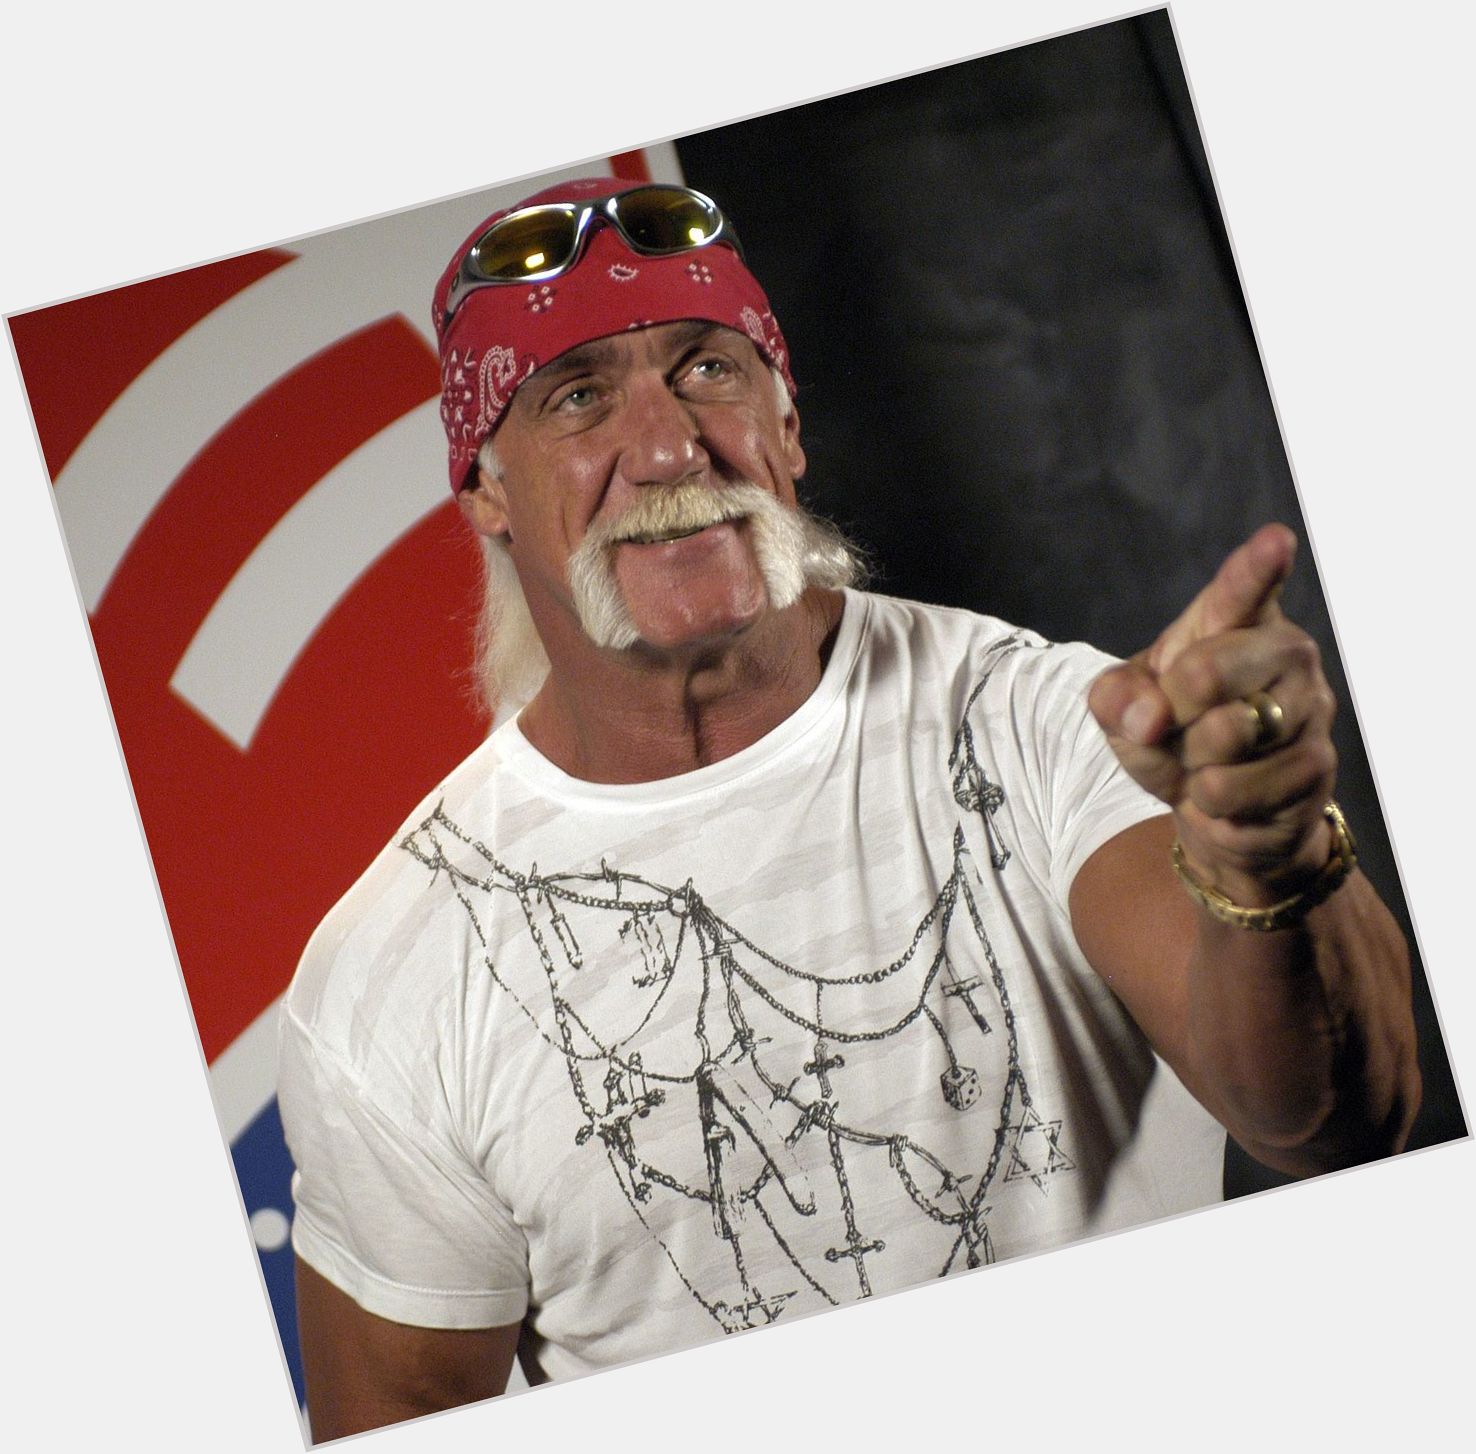 HAPPY BIRTHDAY!  If it\s your birthday today, you are sharing it with Hulk Hogan.  Have an amazing day :-) 